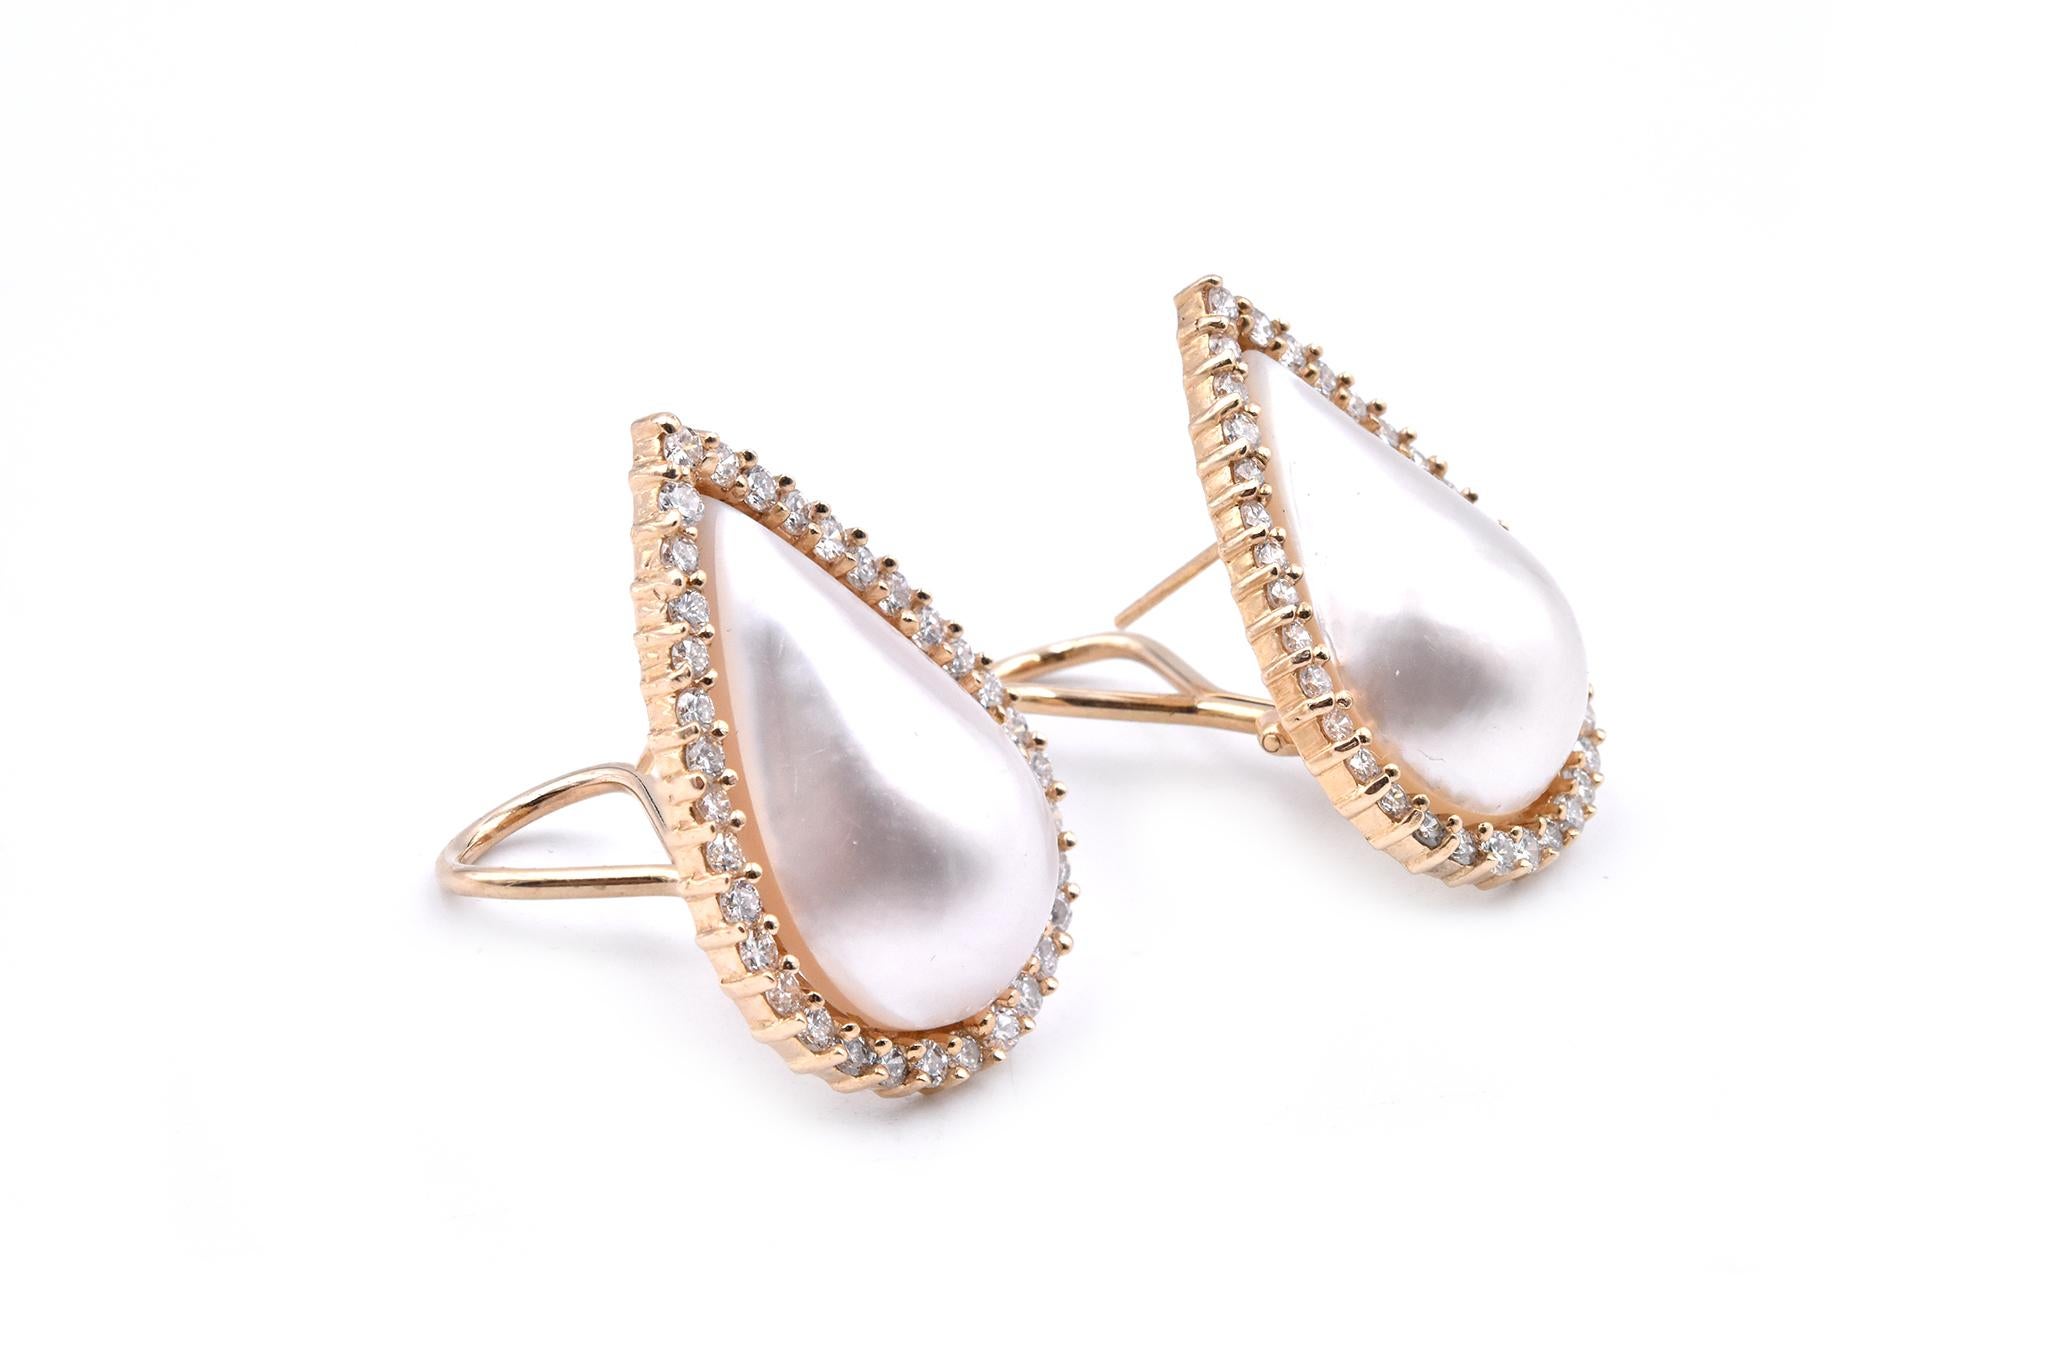 Designer: custom designed
Material: 14k yellow gold
Pearls: 2  pear shaped mabe pearls
Diamonds: 68 round cut = 1.36cttw
Color: G
Clarity: VS
Fastenings: posts with omega backs
Dimensions: earrings measure 27.3 X 18.2 
Weight: 11.22 grams